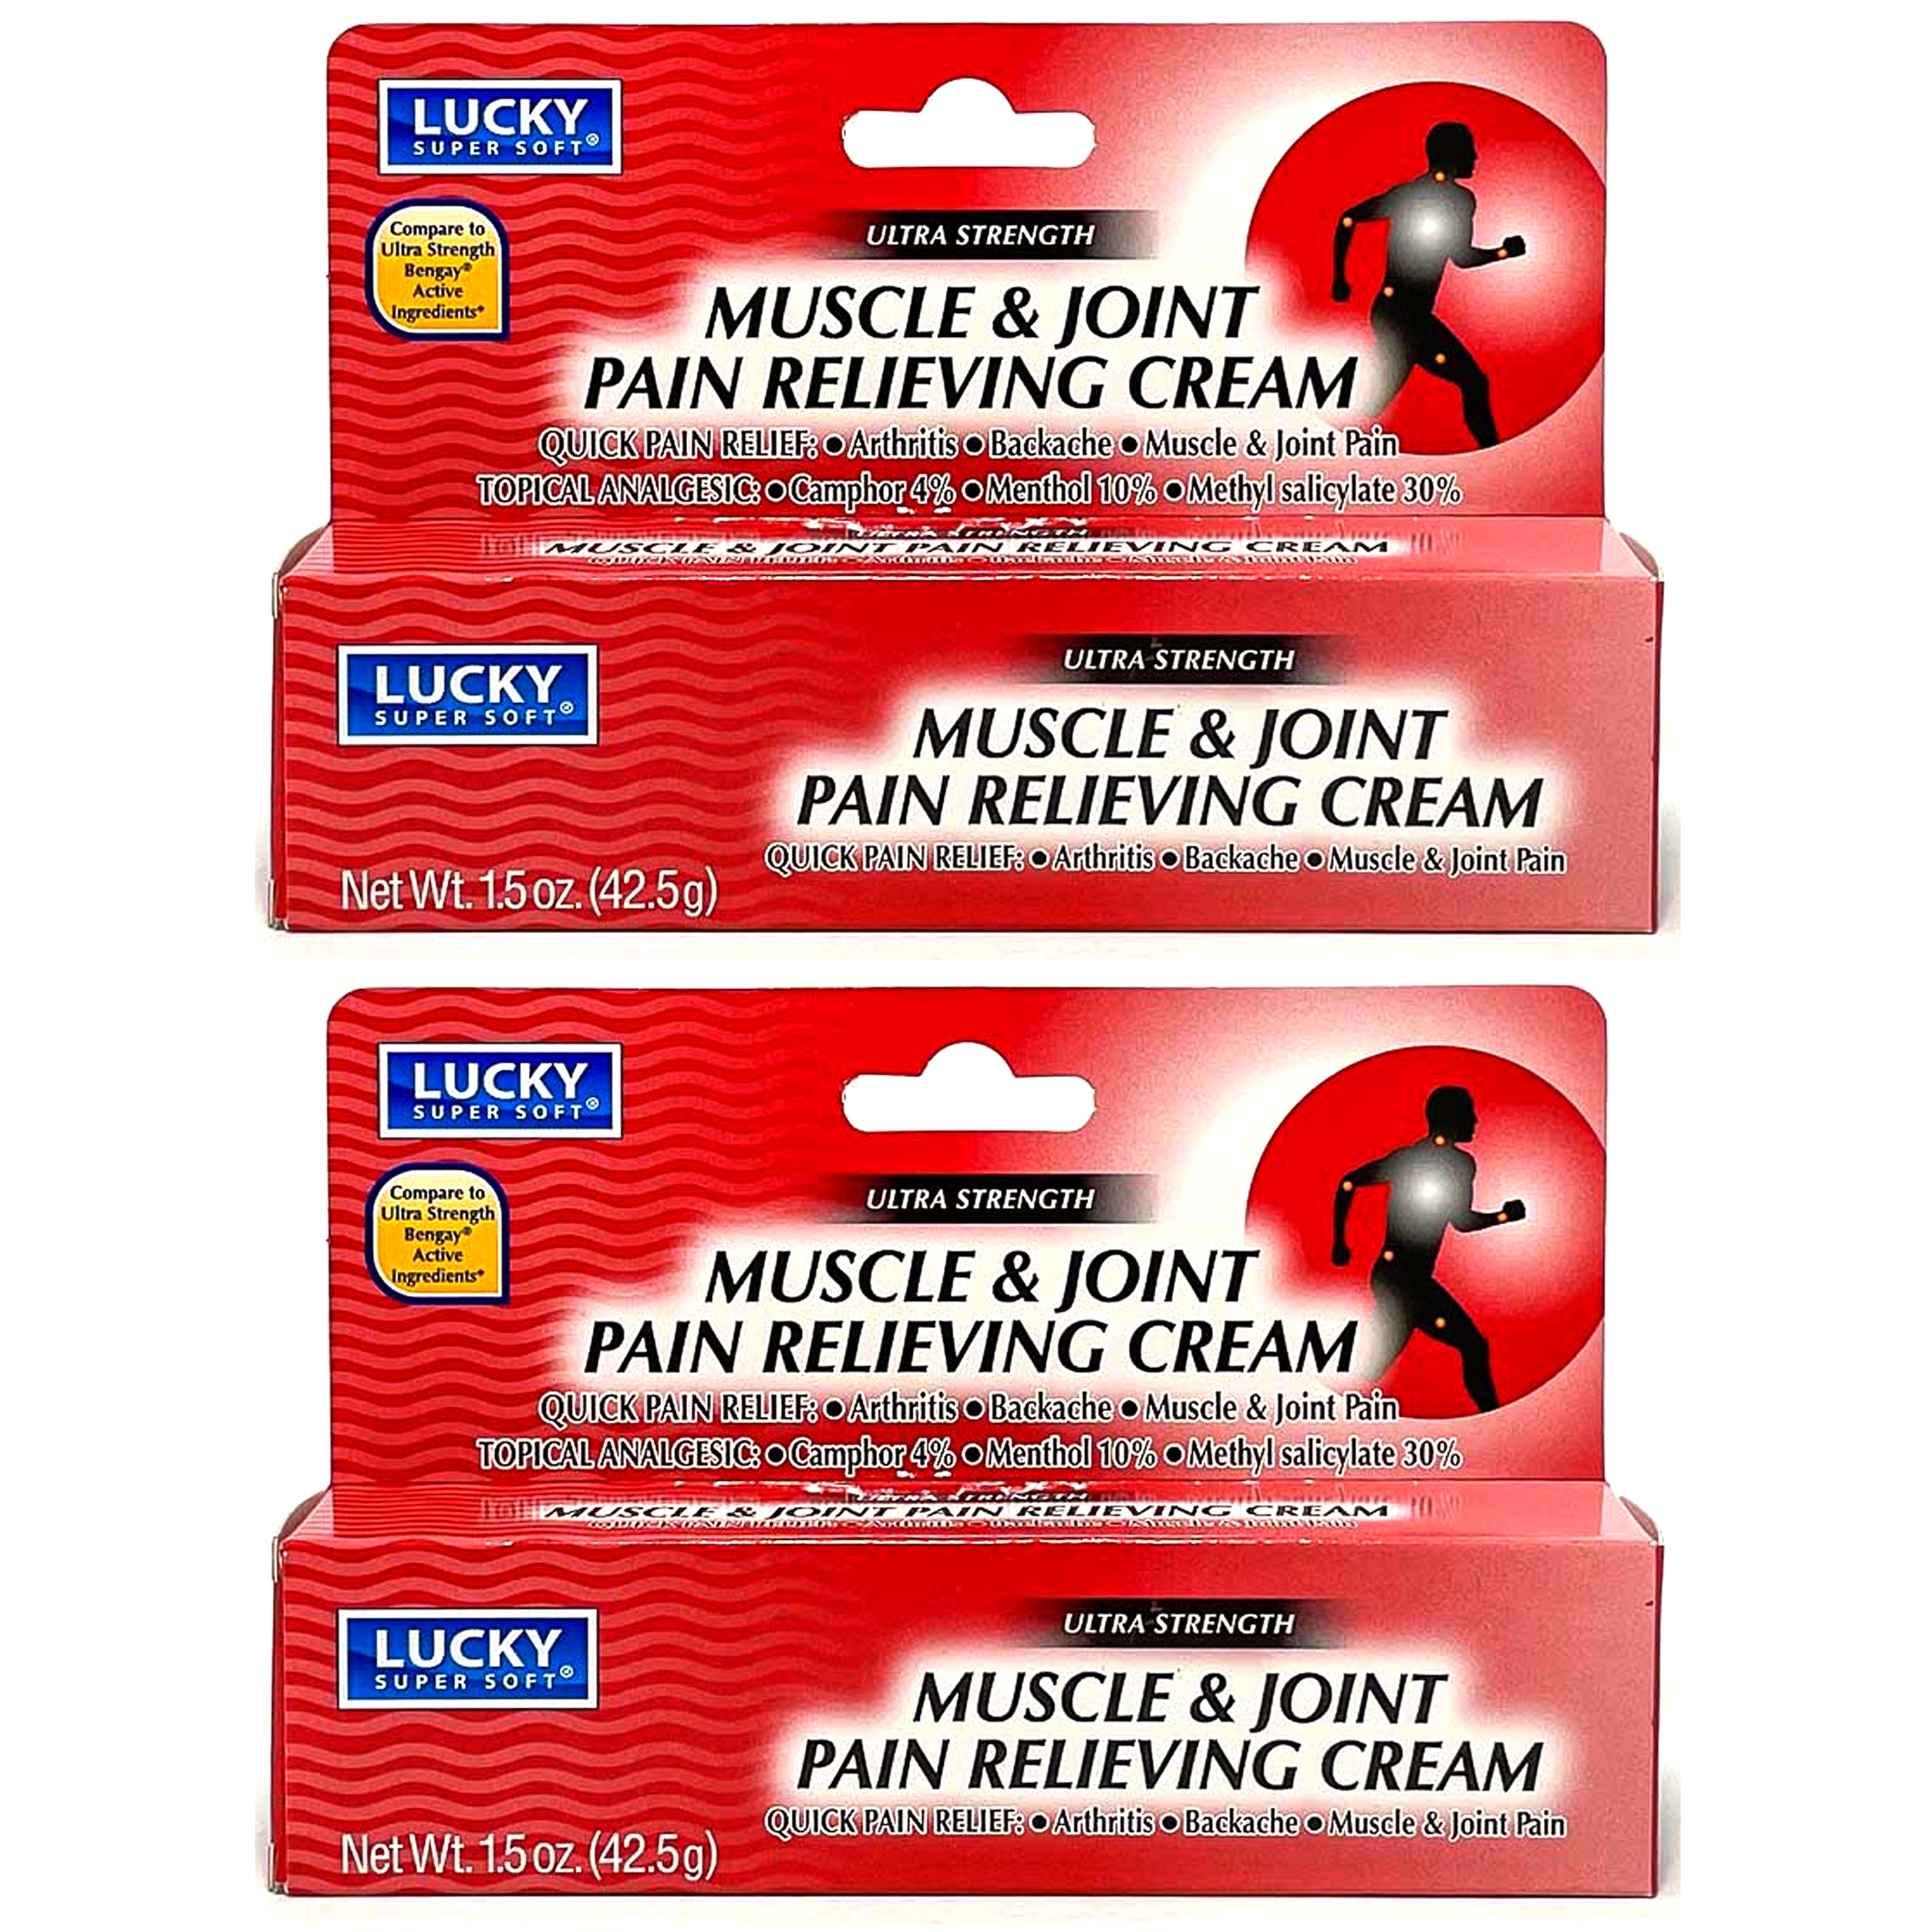 4 PC Muscle Joints Rapid Pain Relief Cream Rub Ache Menthol Analgesic Ointment, Red